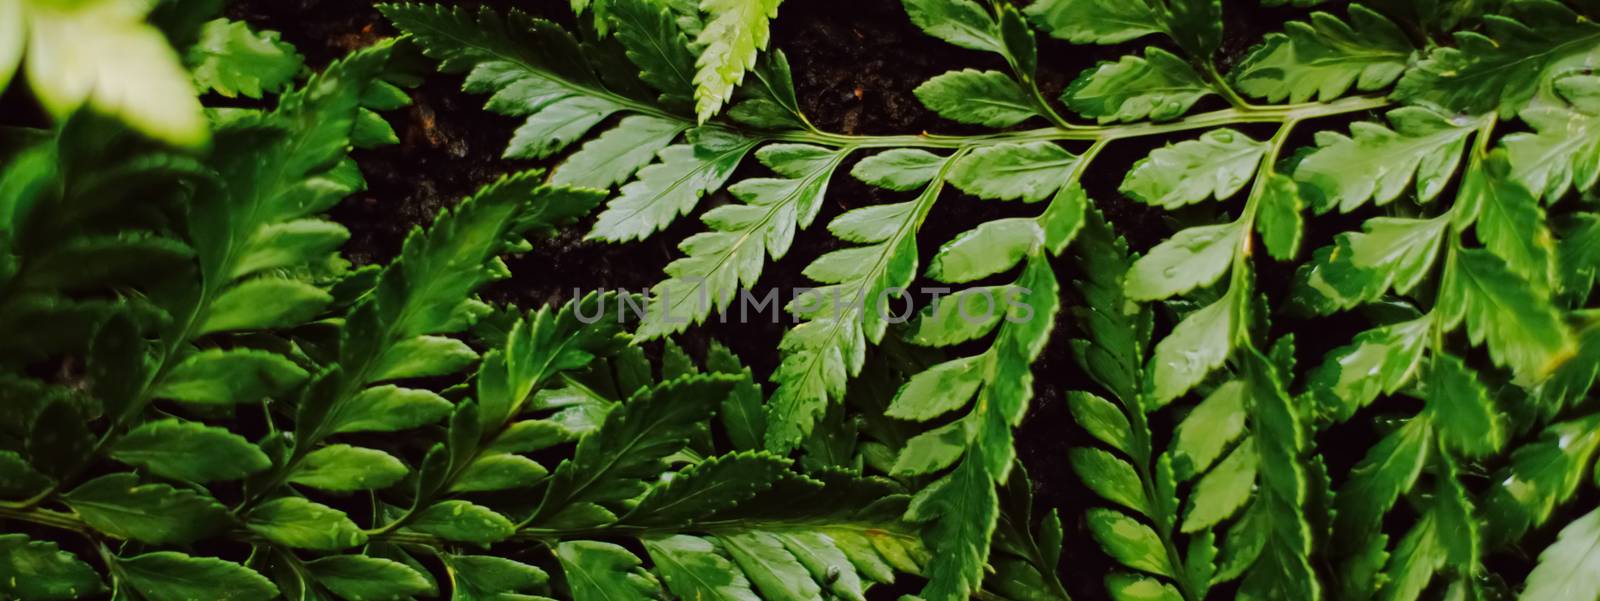 Tropical plant leaves in garden as botanical background, nature and environment close-up